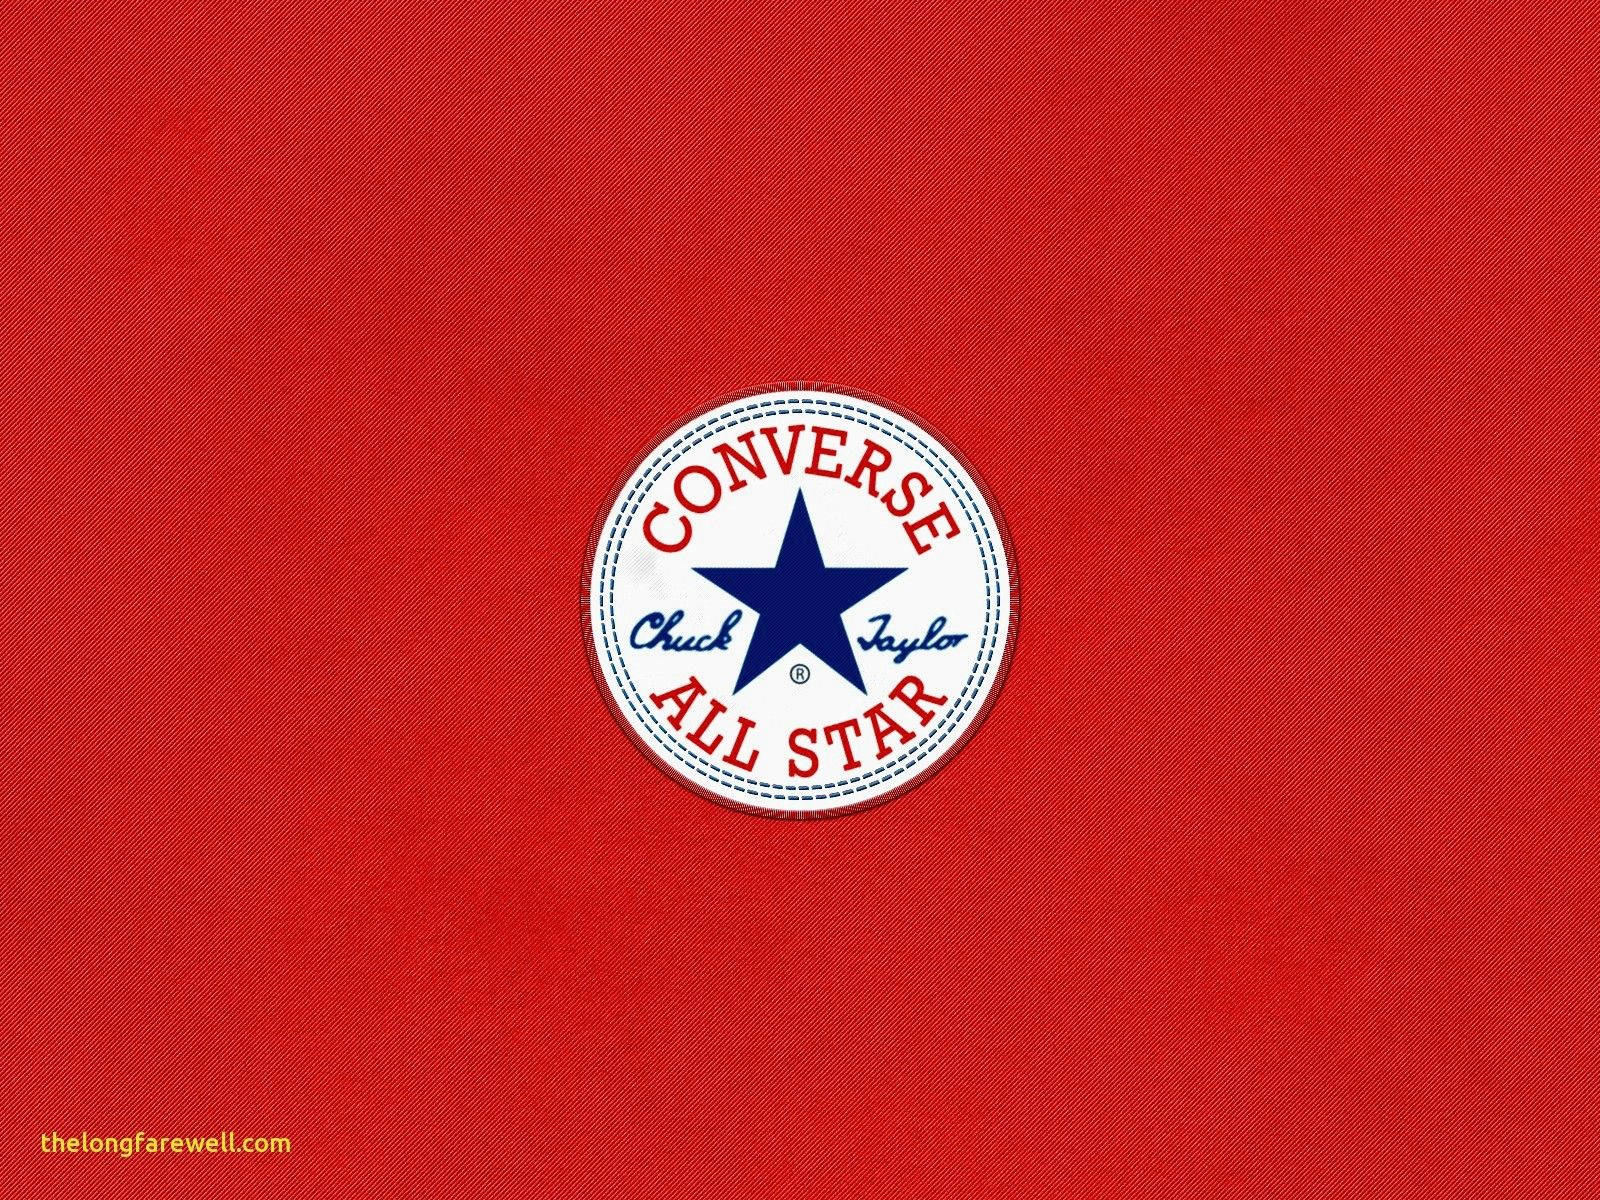 Converse Logo In Red Aesthetic